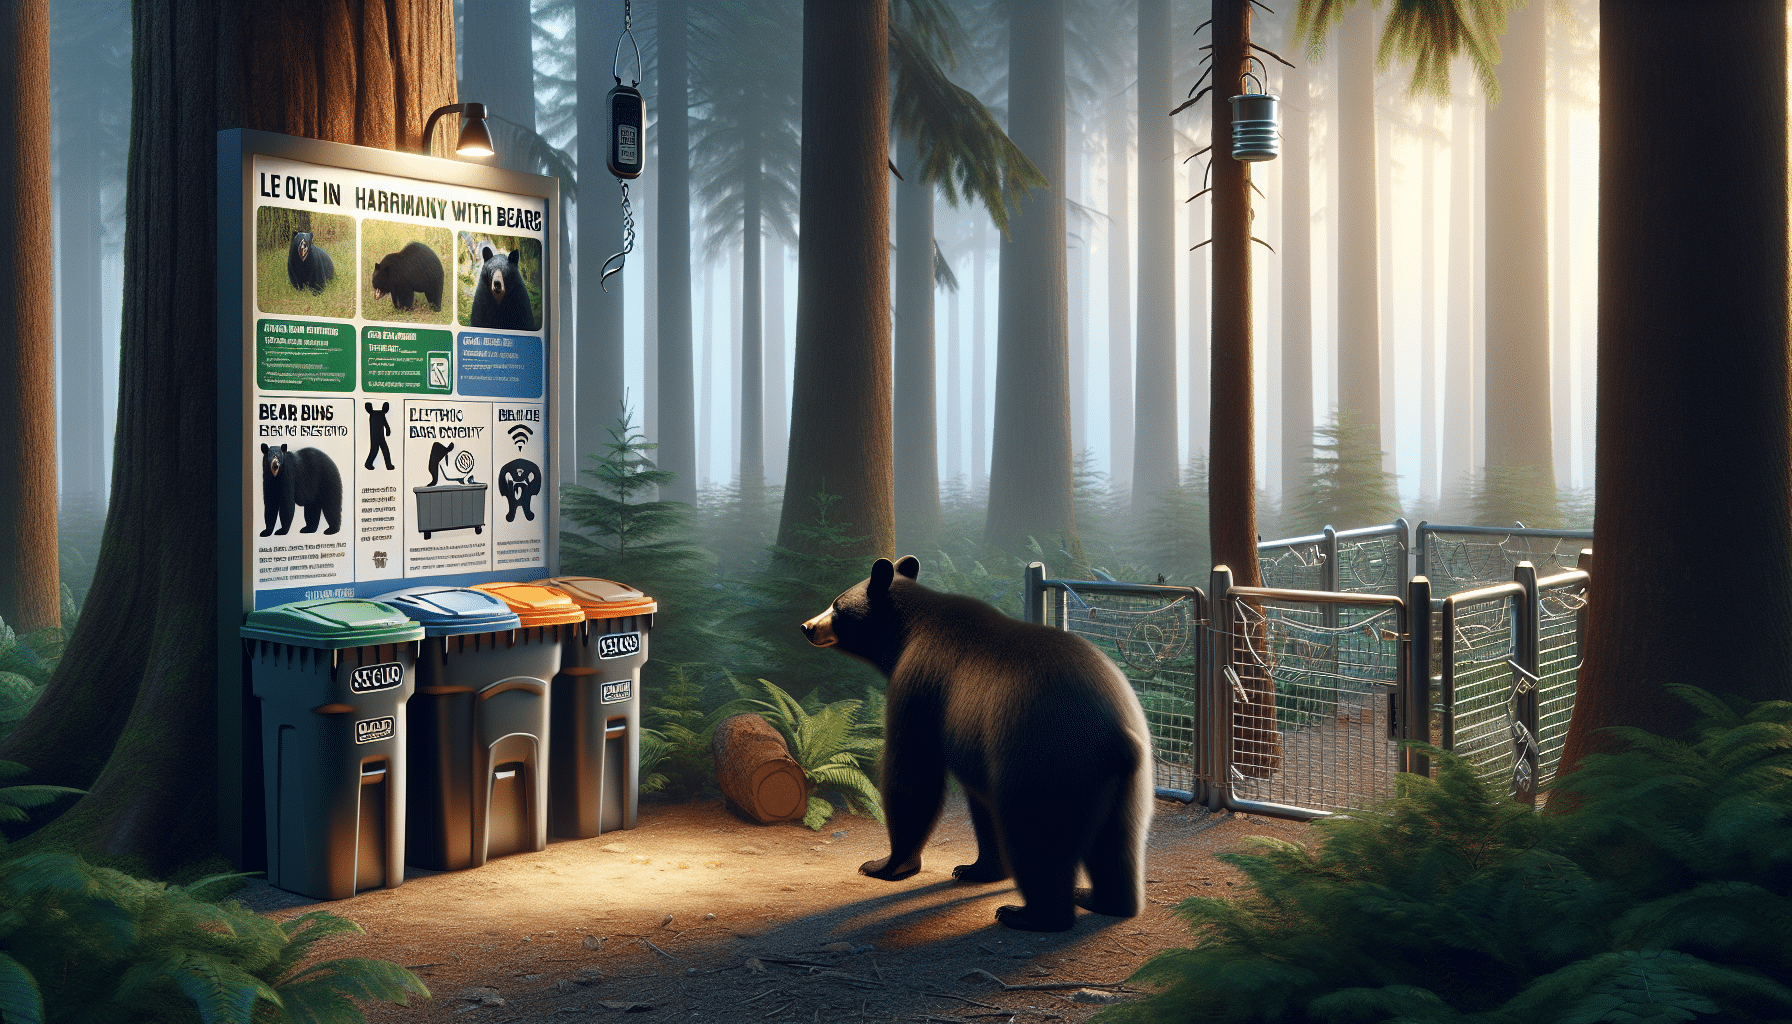 A serene forest setting with a curious black bear investigating a secure bear-proof trash bin. Surrounding the bin, several other bear deterrents are visible, including an electric bear fence and a bear bell hanging from a branch. There's also a large poster board featuring various bear deterrent techniques and how to live in harmony with bears. Without any people in the scene, the forest is dominated by tall evergreens, the ambient lighting is the soft glow of a setting sun, and there is no text, brand names or logos in the image.